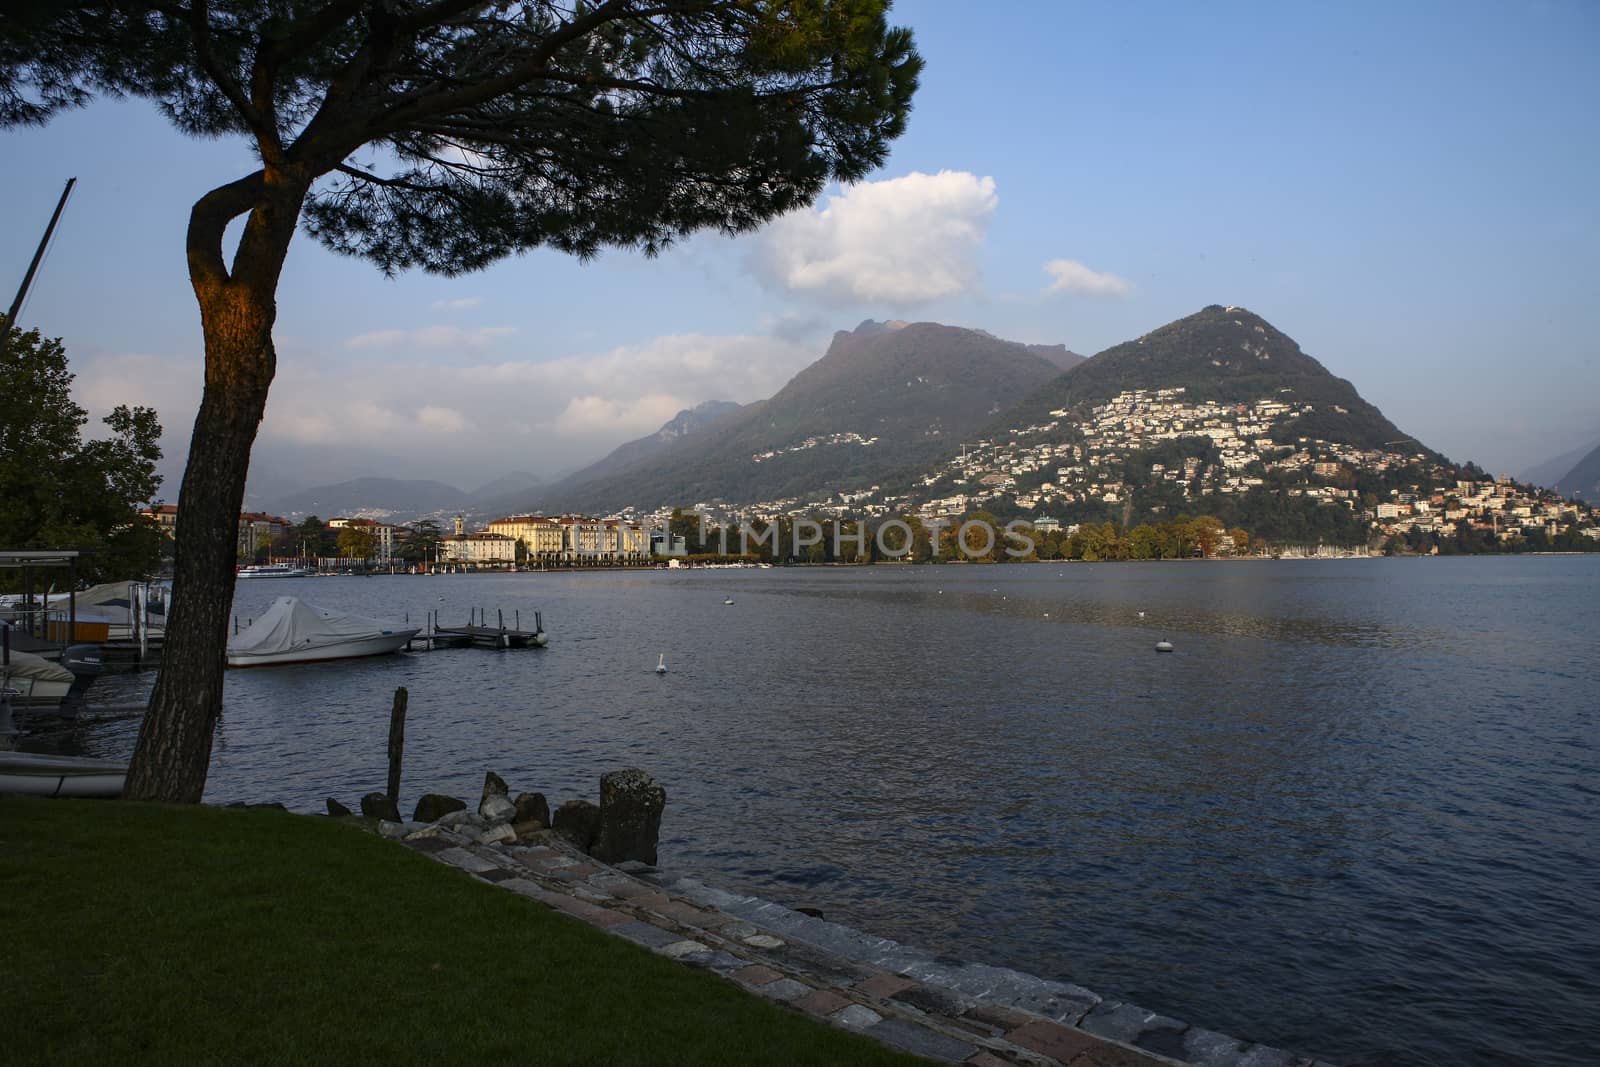 Water front with view of Lugano city and lake, Switzerland by PeterHofstetter